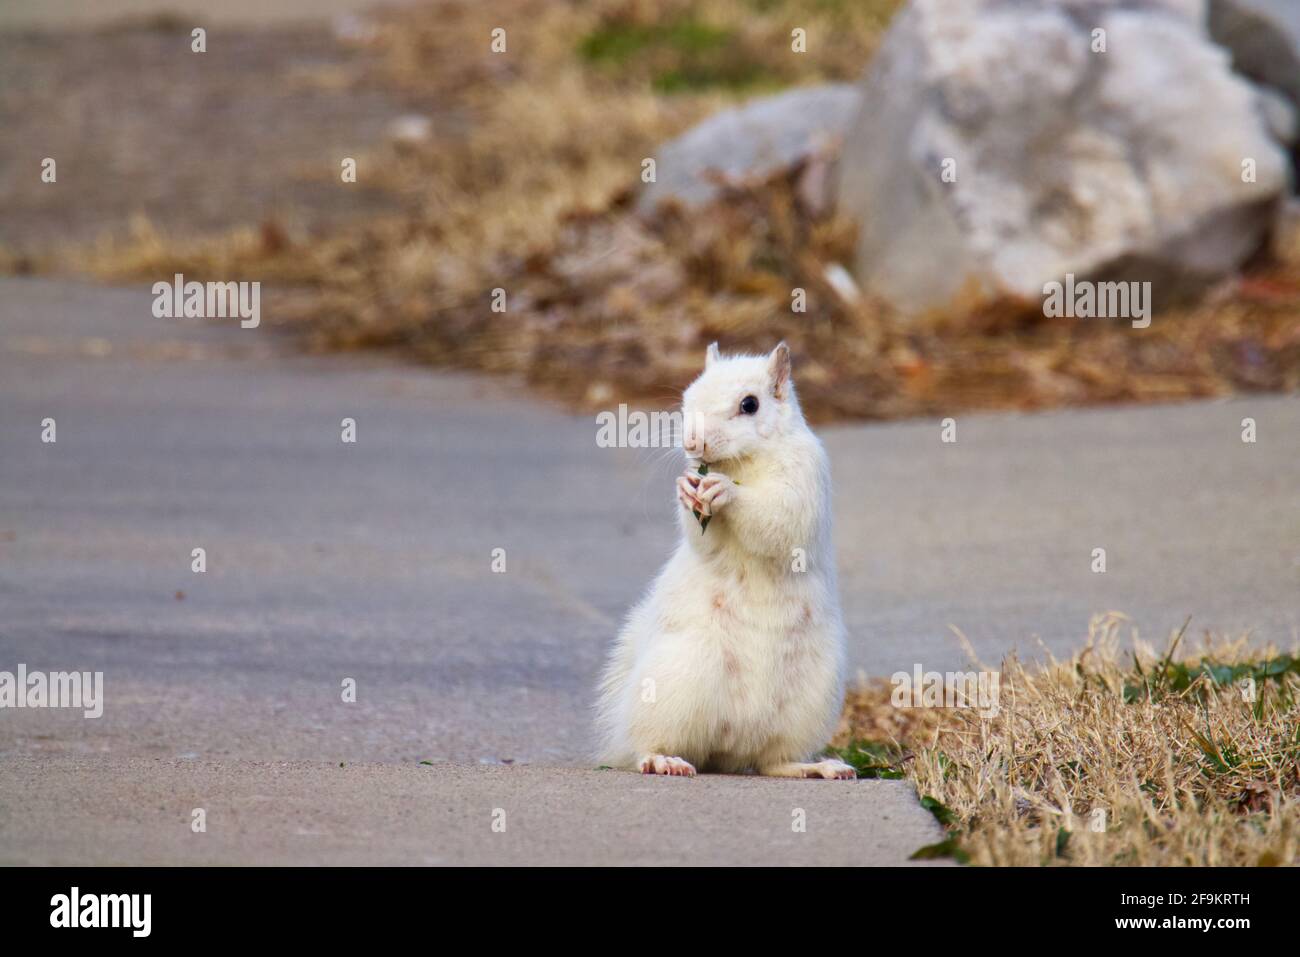 White Squirrel checking it’s surroundings while snacking Stock Photo